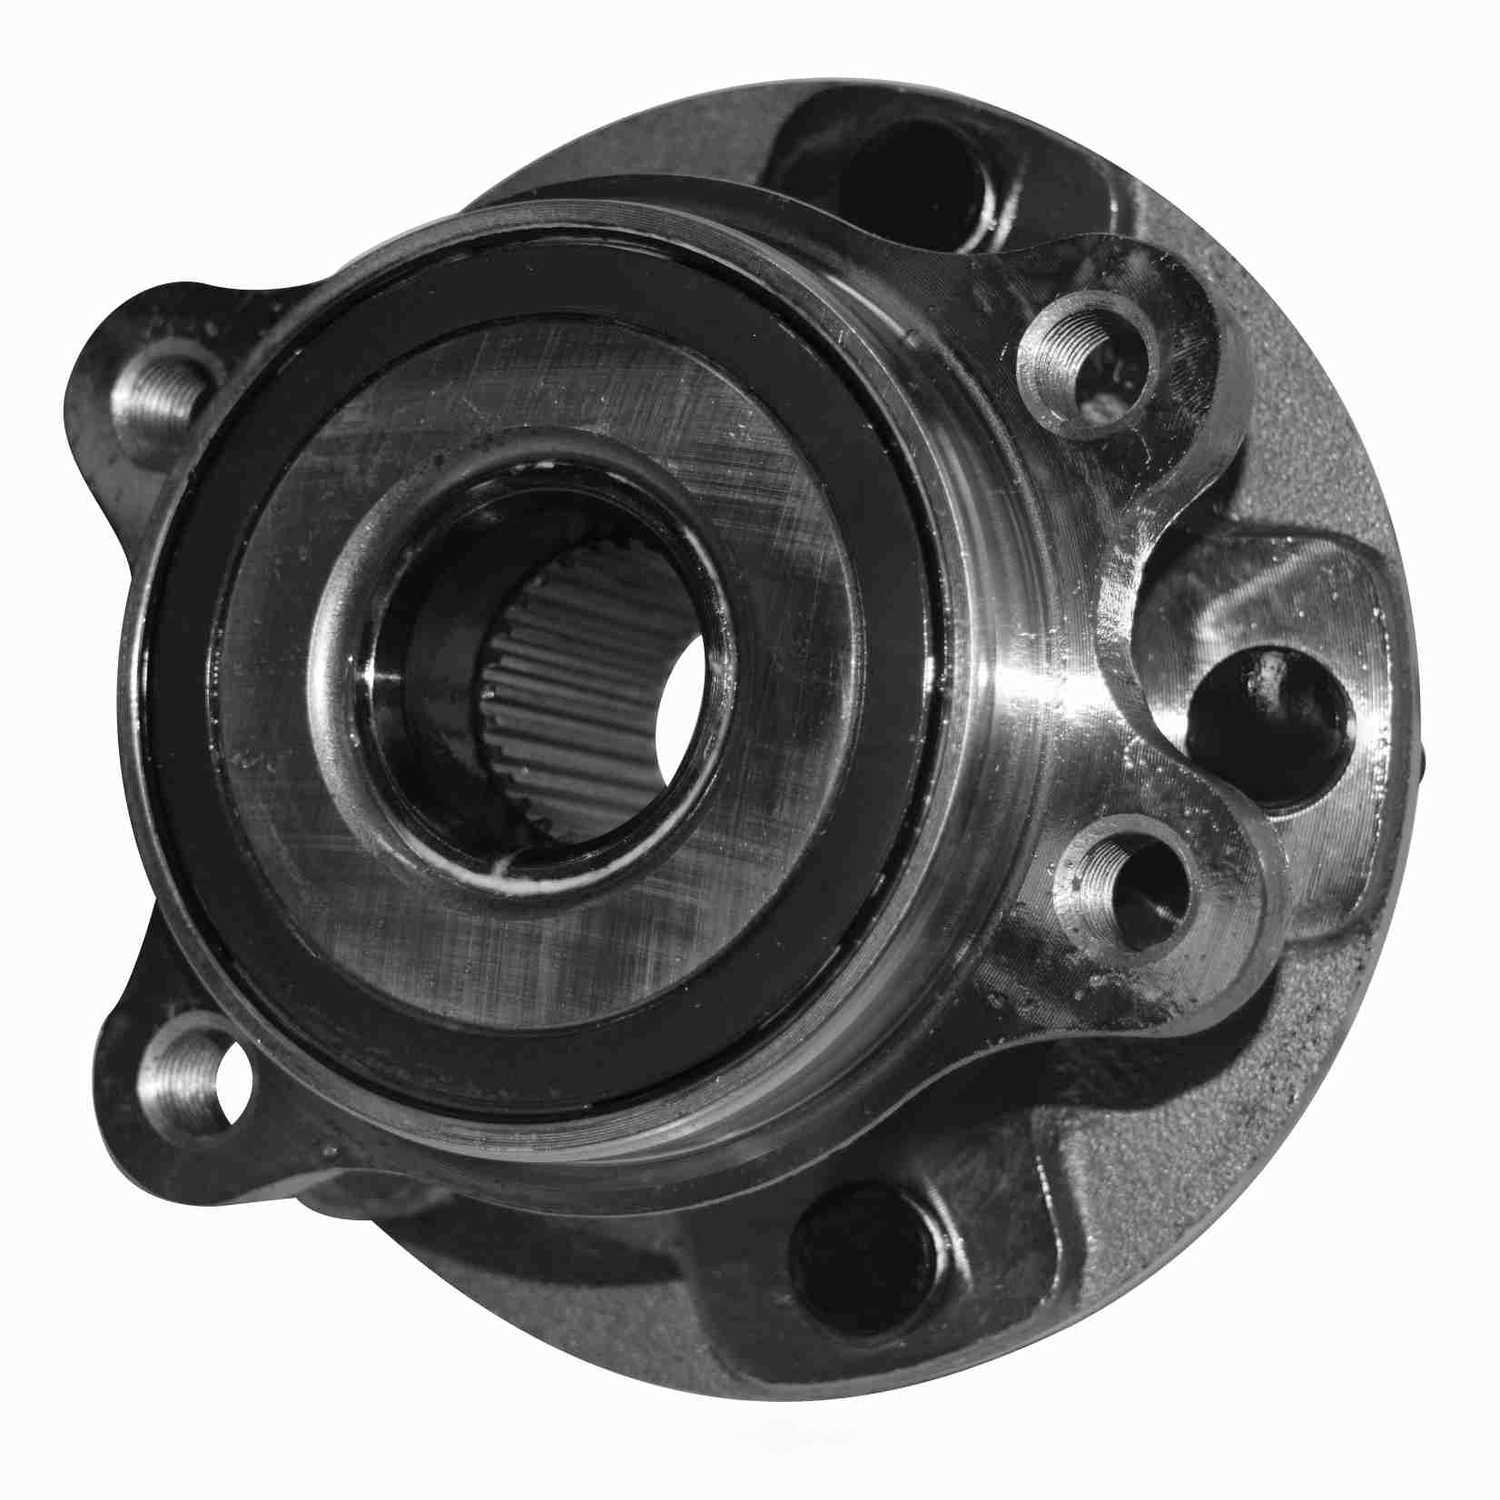 GSP NORTH AMERICA INC. - GSP Axle Bearing & Hub Assembly - AD8 694258